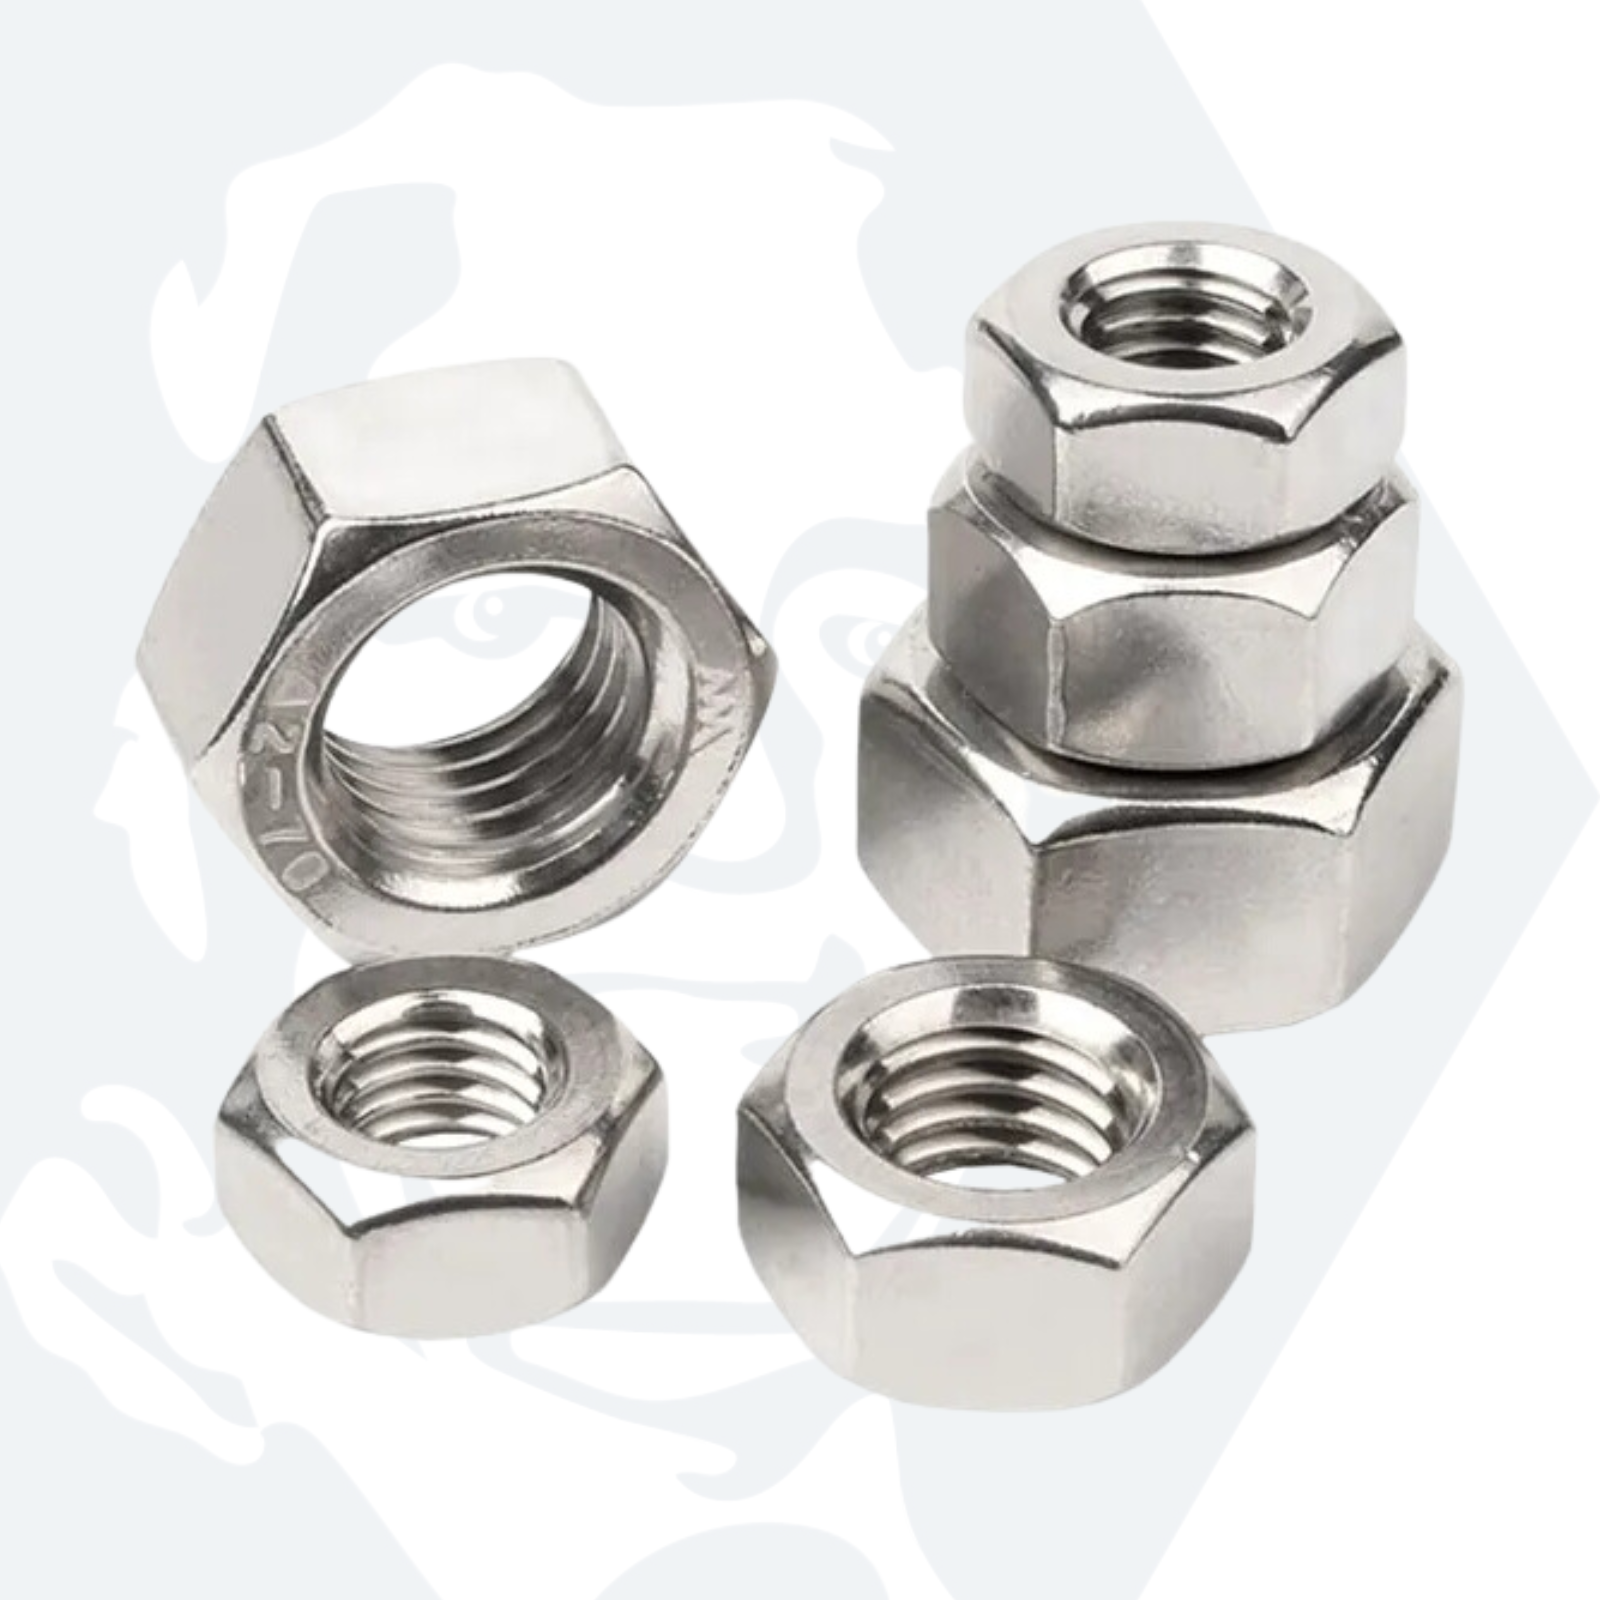 M12 Hexagon Nuts (DIN 934) - Stainless Steel (A2)